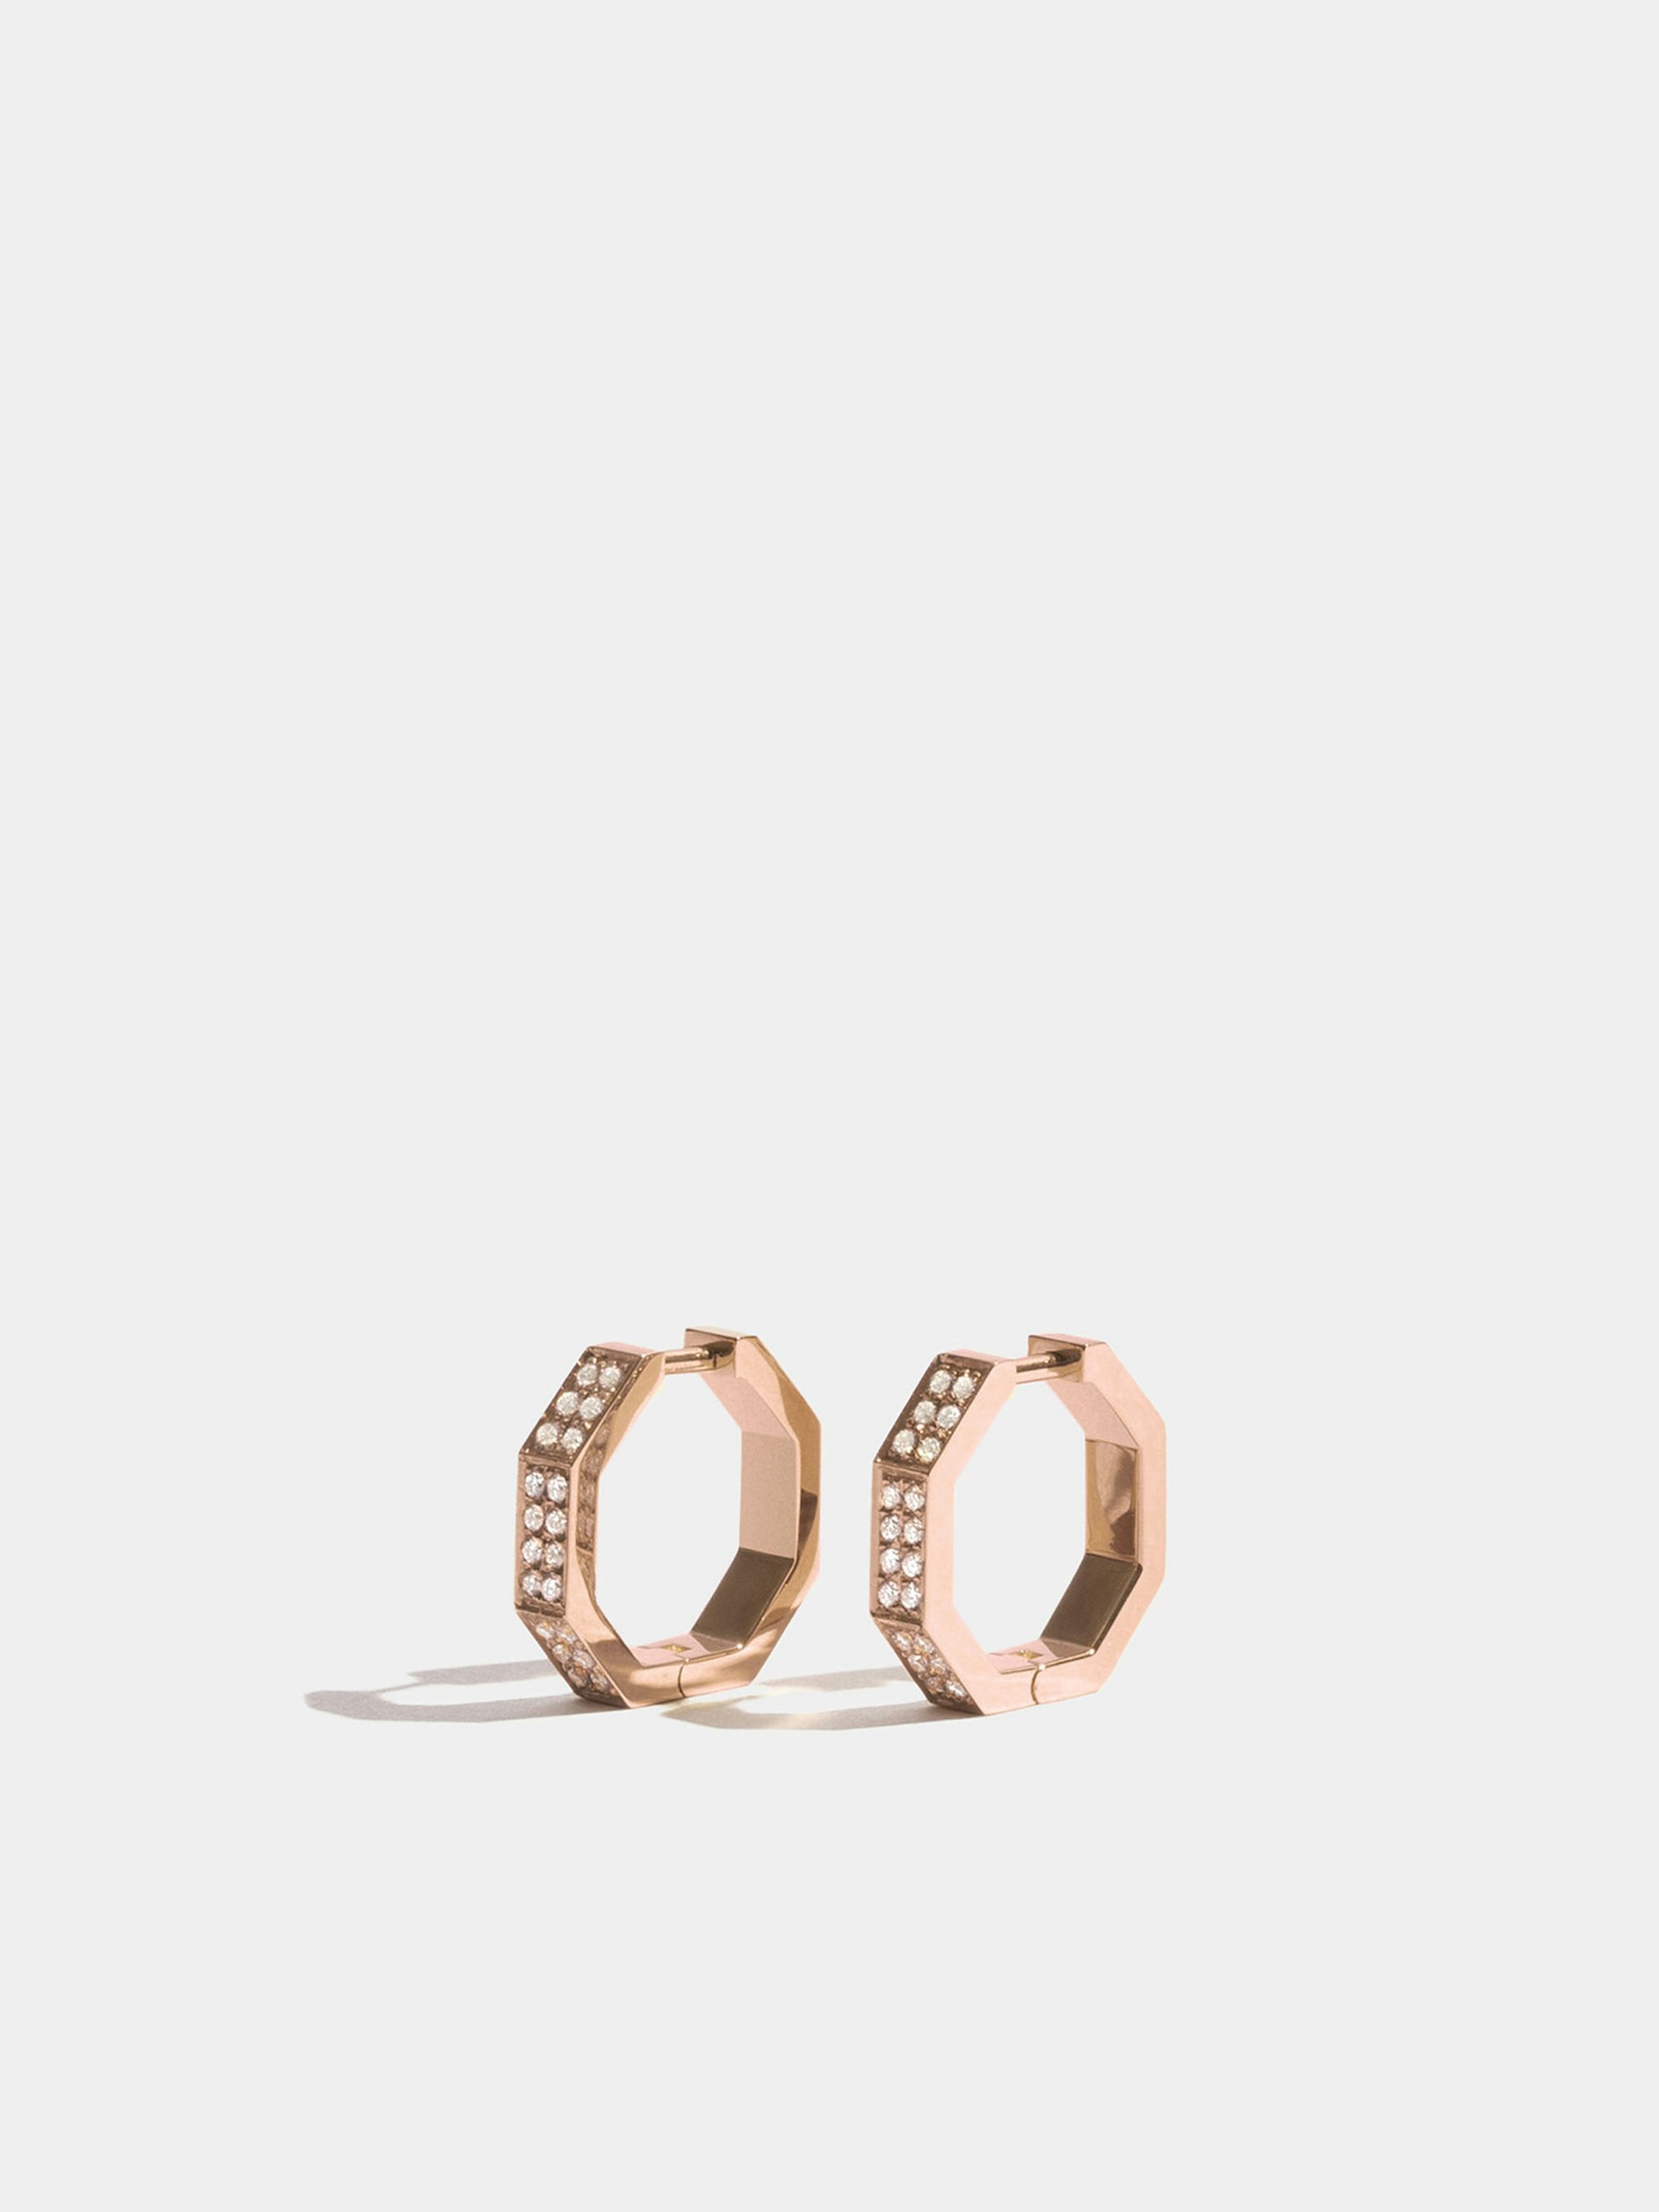 Octogone 13mm earrings in 18k Fairmined ethical rose gold, paved with lab-grown diamonds, the pair.